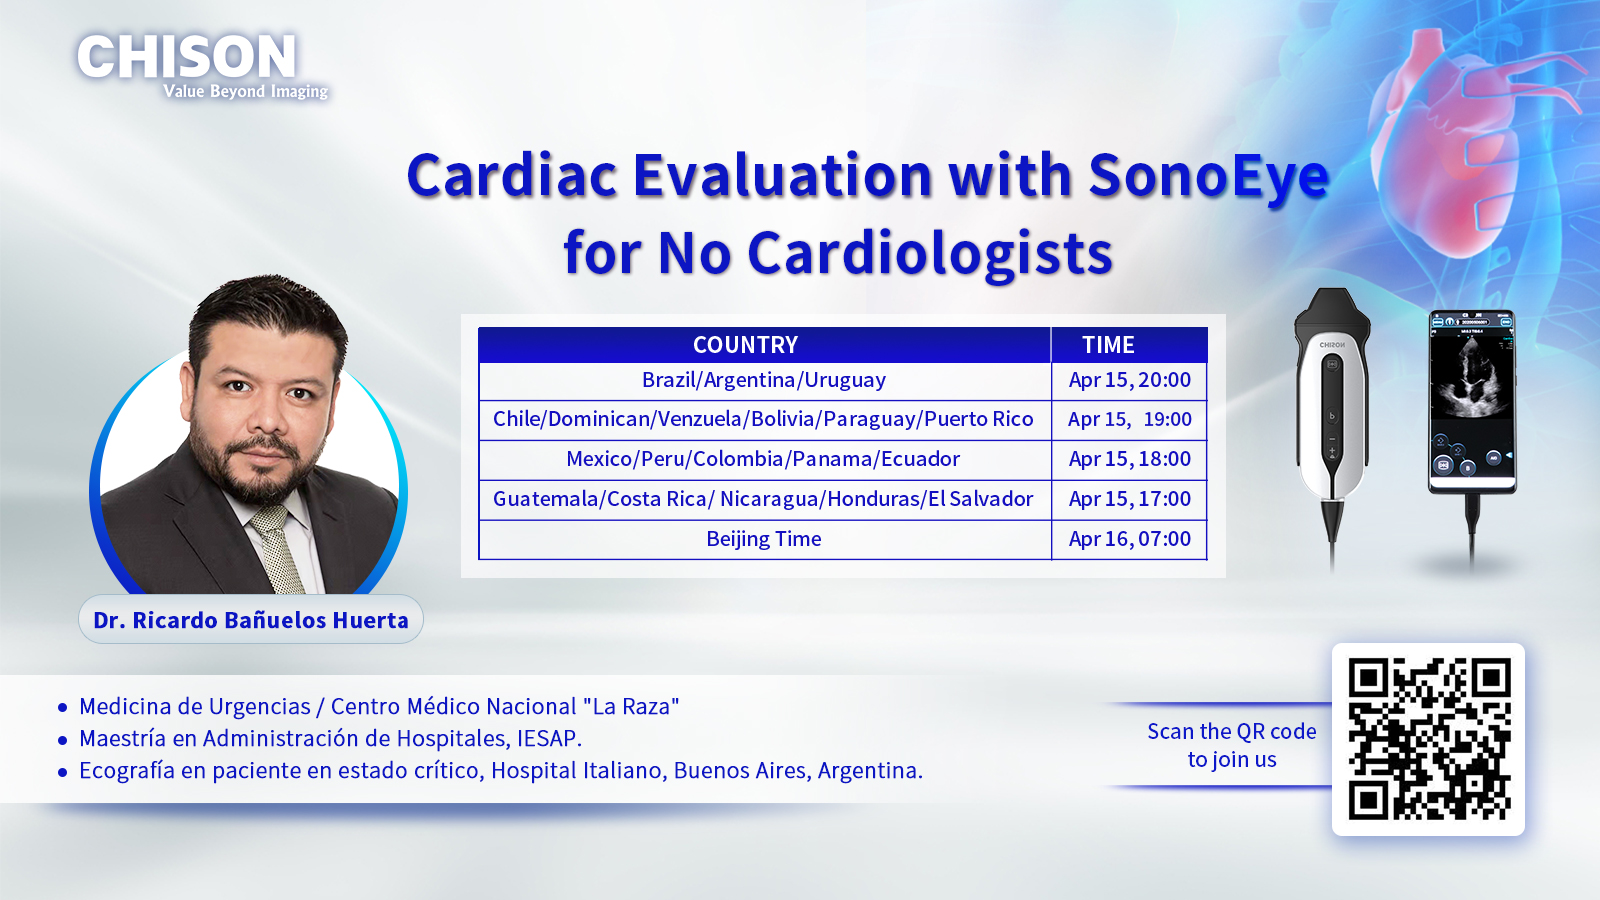 Cardiac Evaluation with SonoEye for No Cardiologists